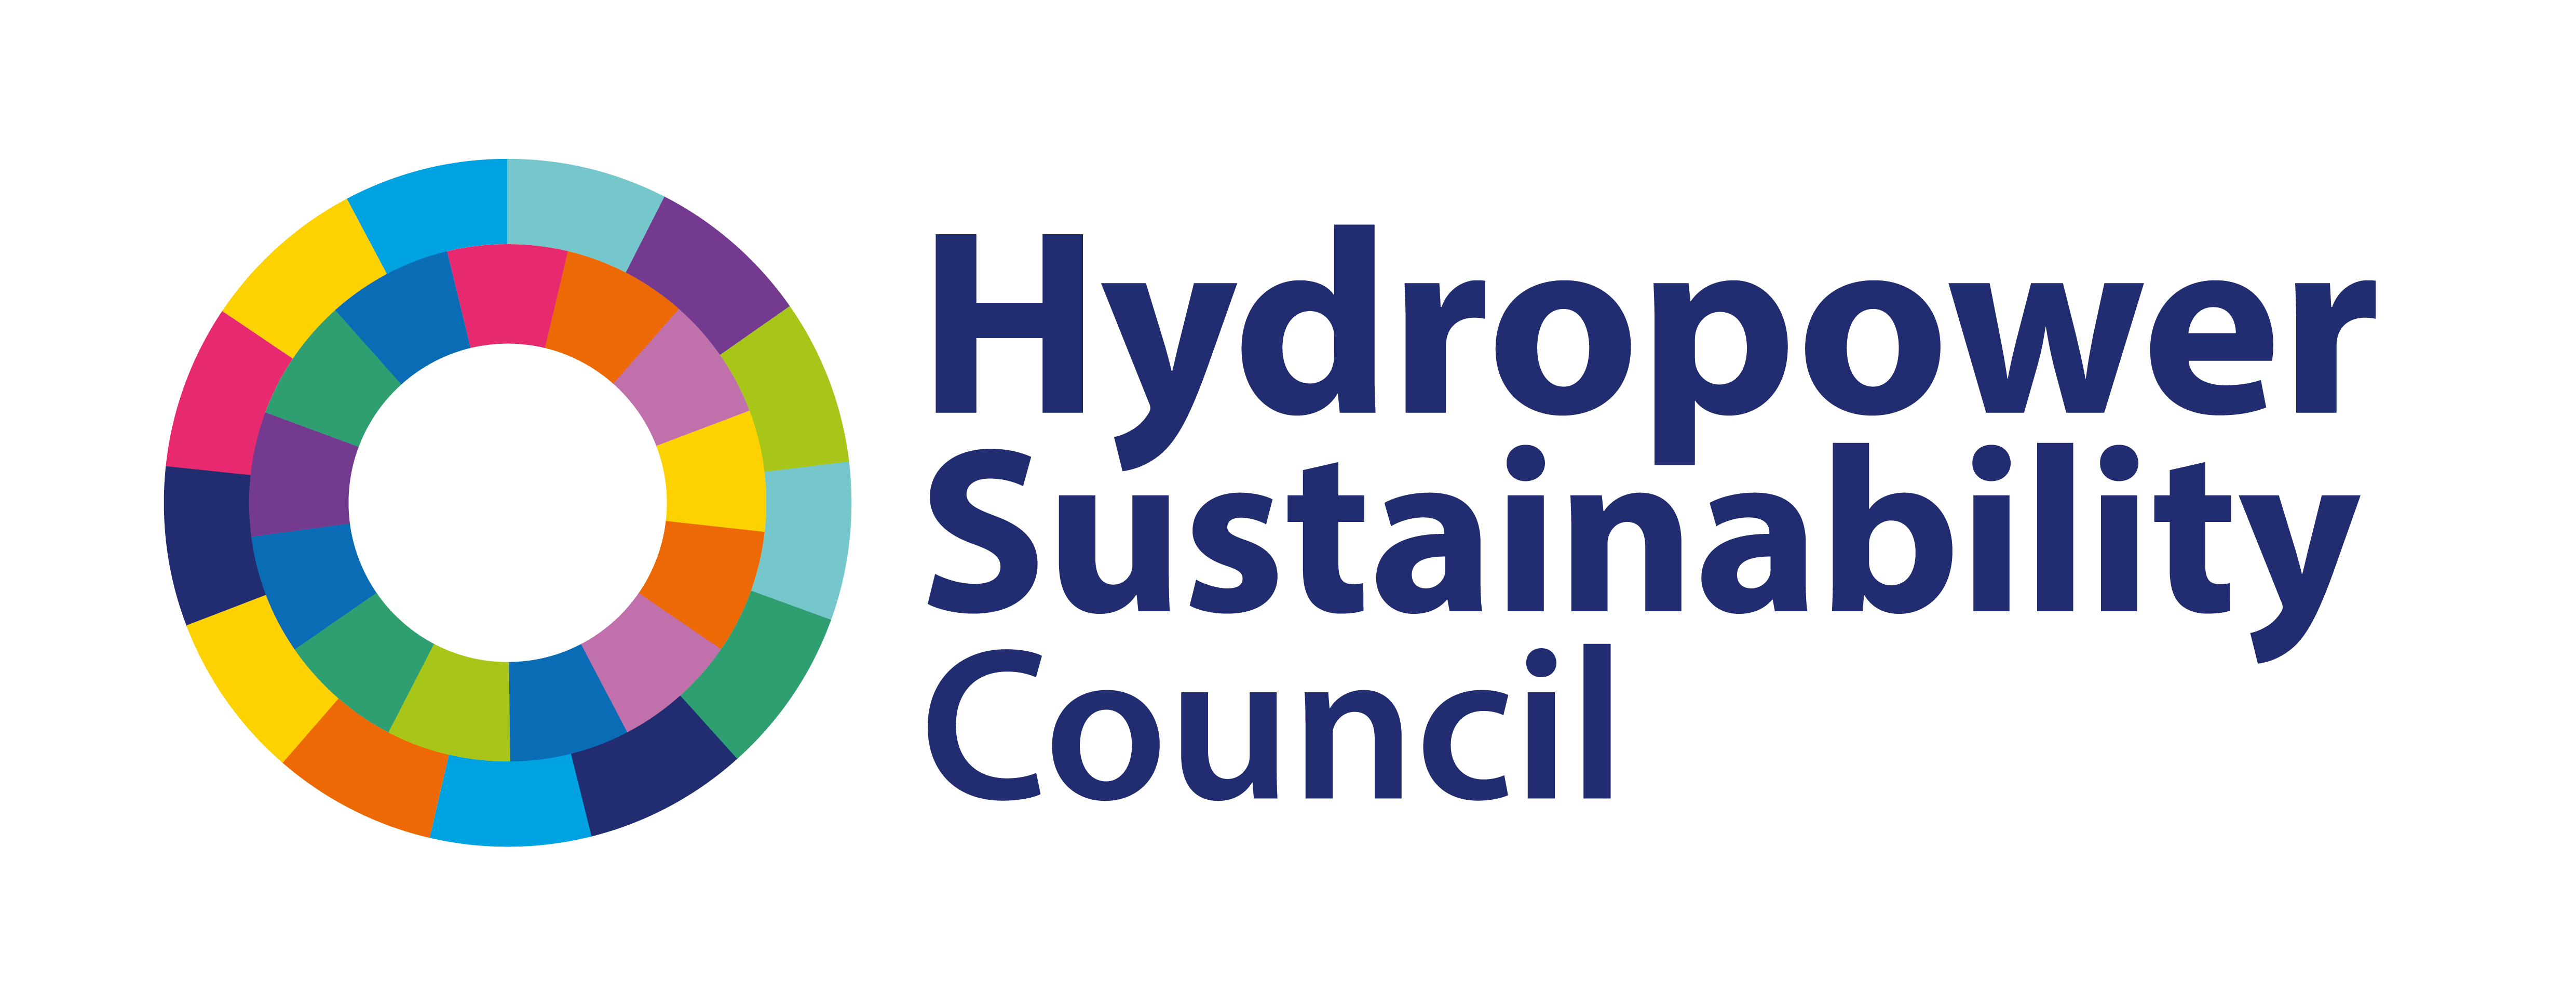  © Hydropower Sustainability Council